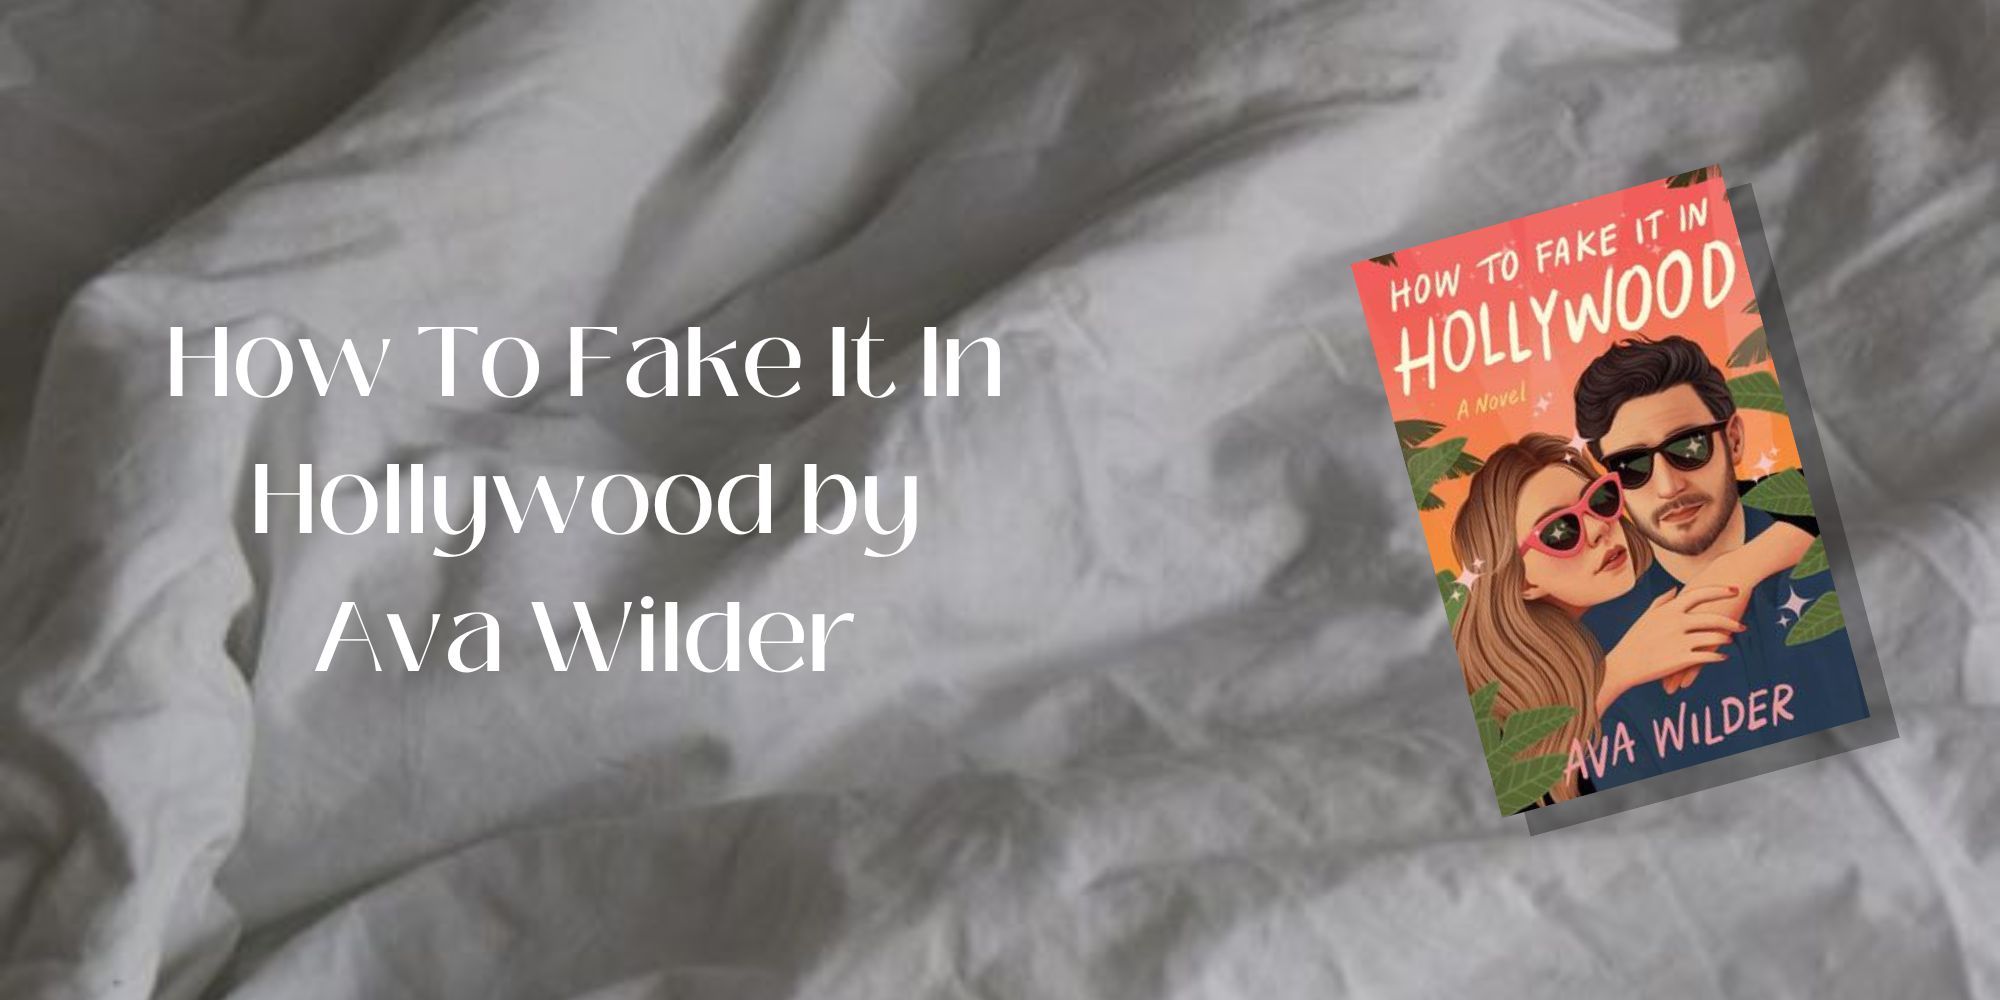 A paperback of How To Fake It In Hollywood by Ava Wilder